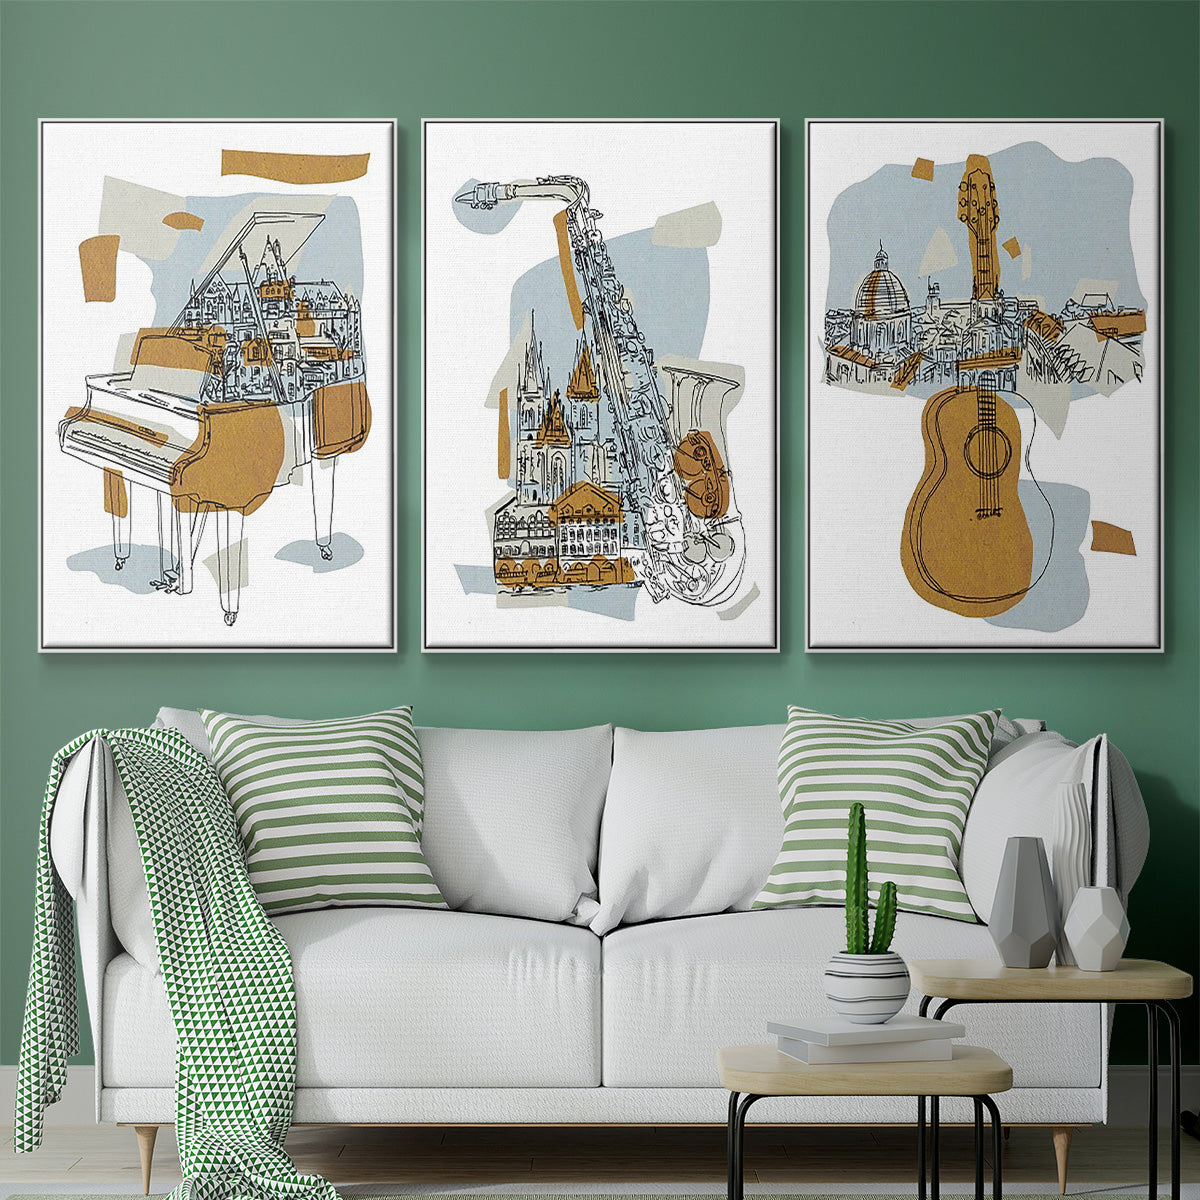 Rehearsal I - Framed Premium Gallery Wrapped Canvas L Frame 3 Piece Set - Ready to Hang